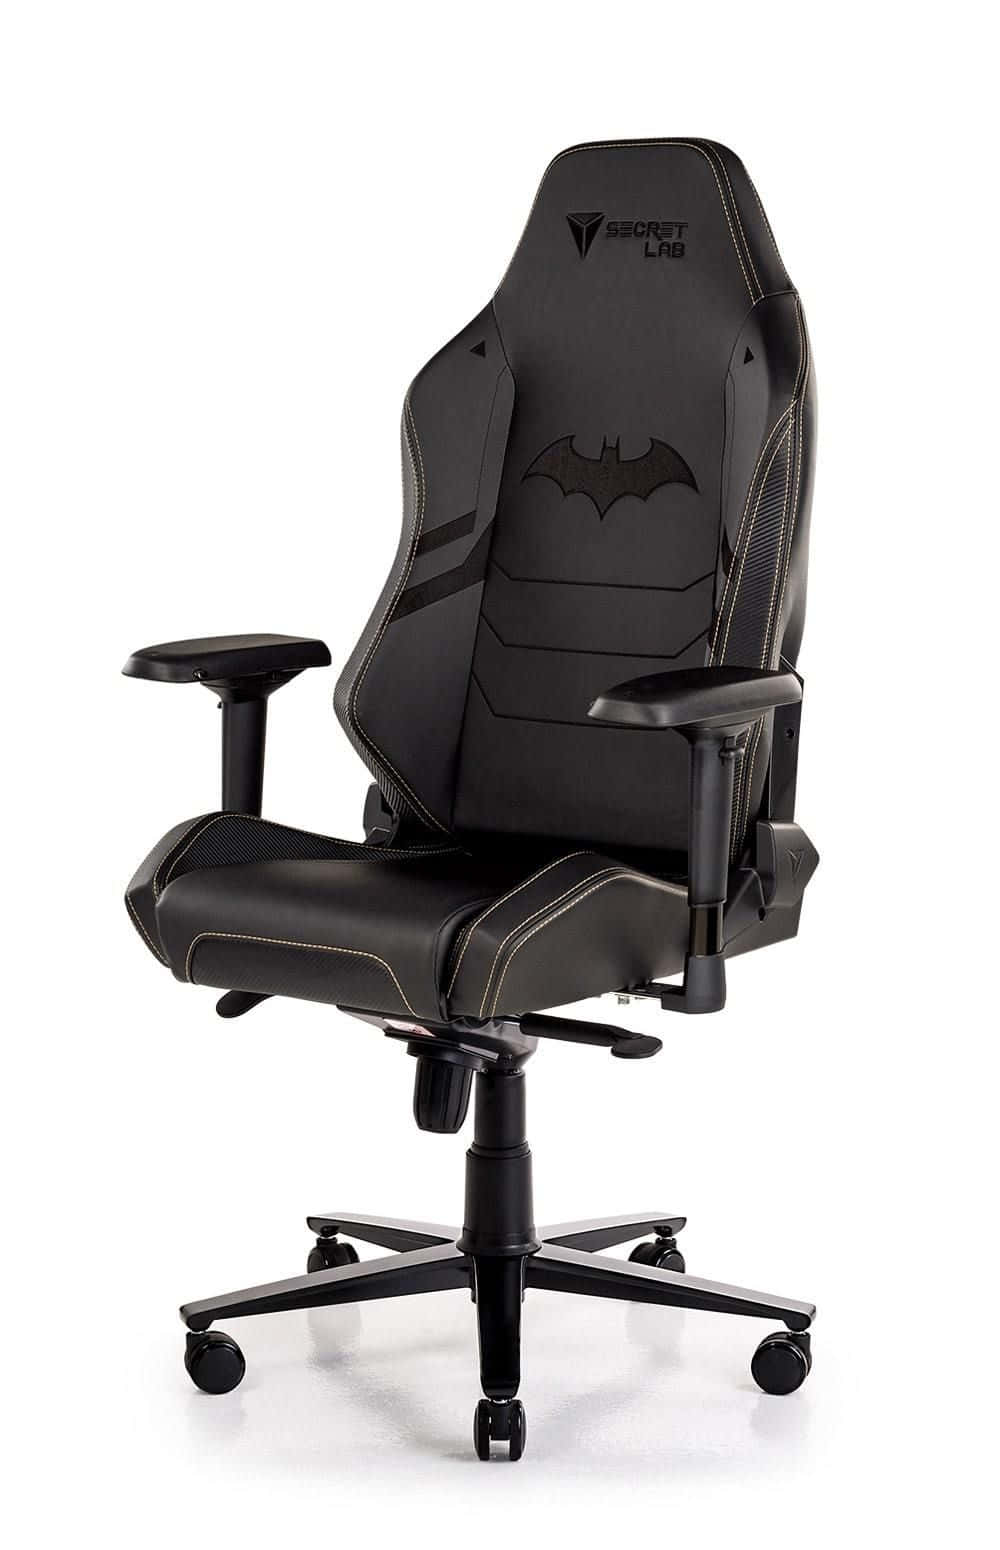 Comfortable Gaming Chairs for Long Hours of Fun Wallpaper